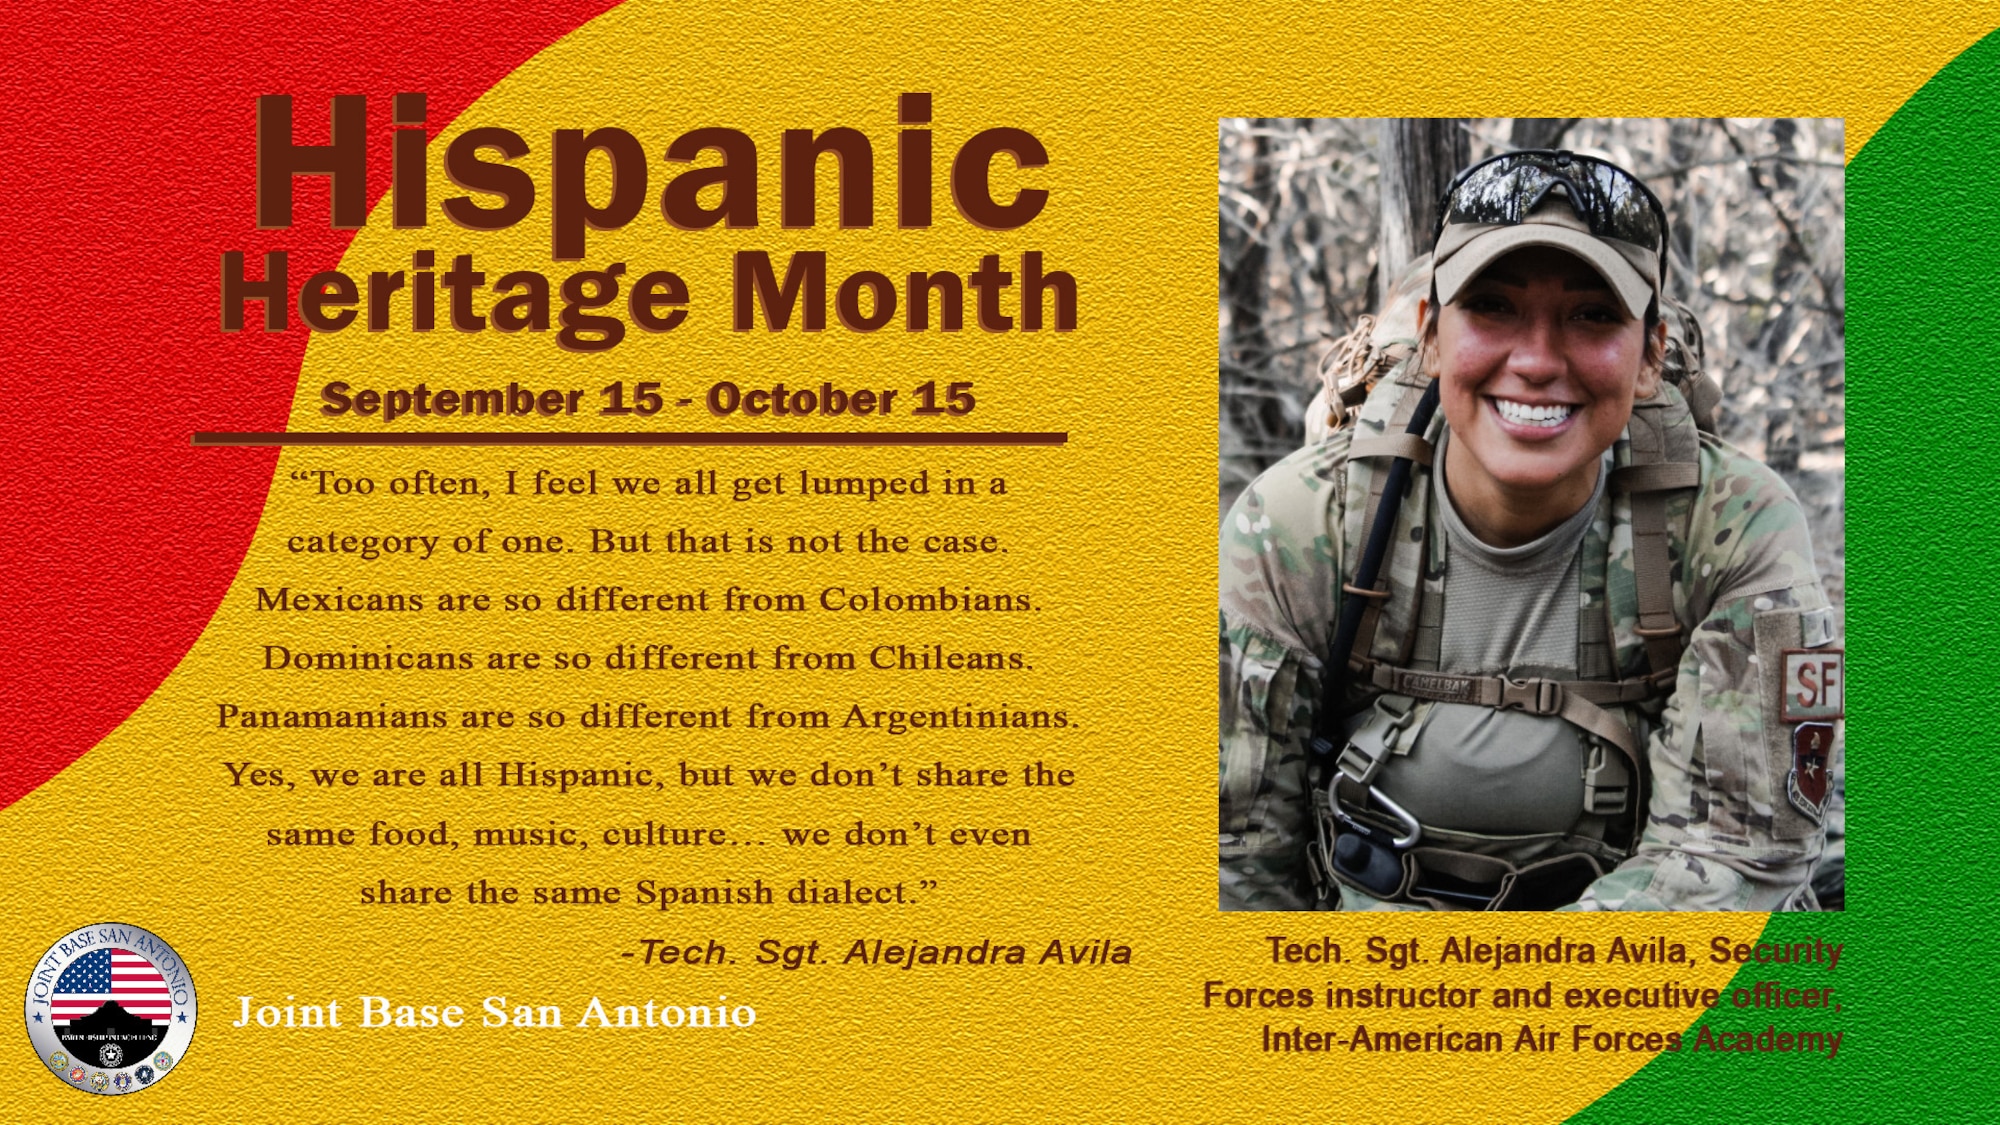 Tech. Sgt. Alejandra Avila will celebrate her ninth year in the Air Force Sept. 27, right in the middle of Hispanic Heritage Month.